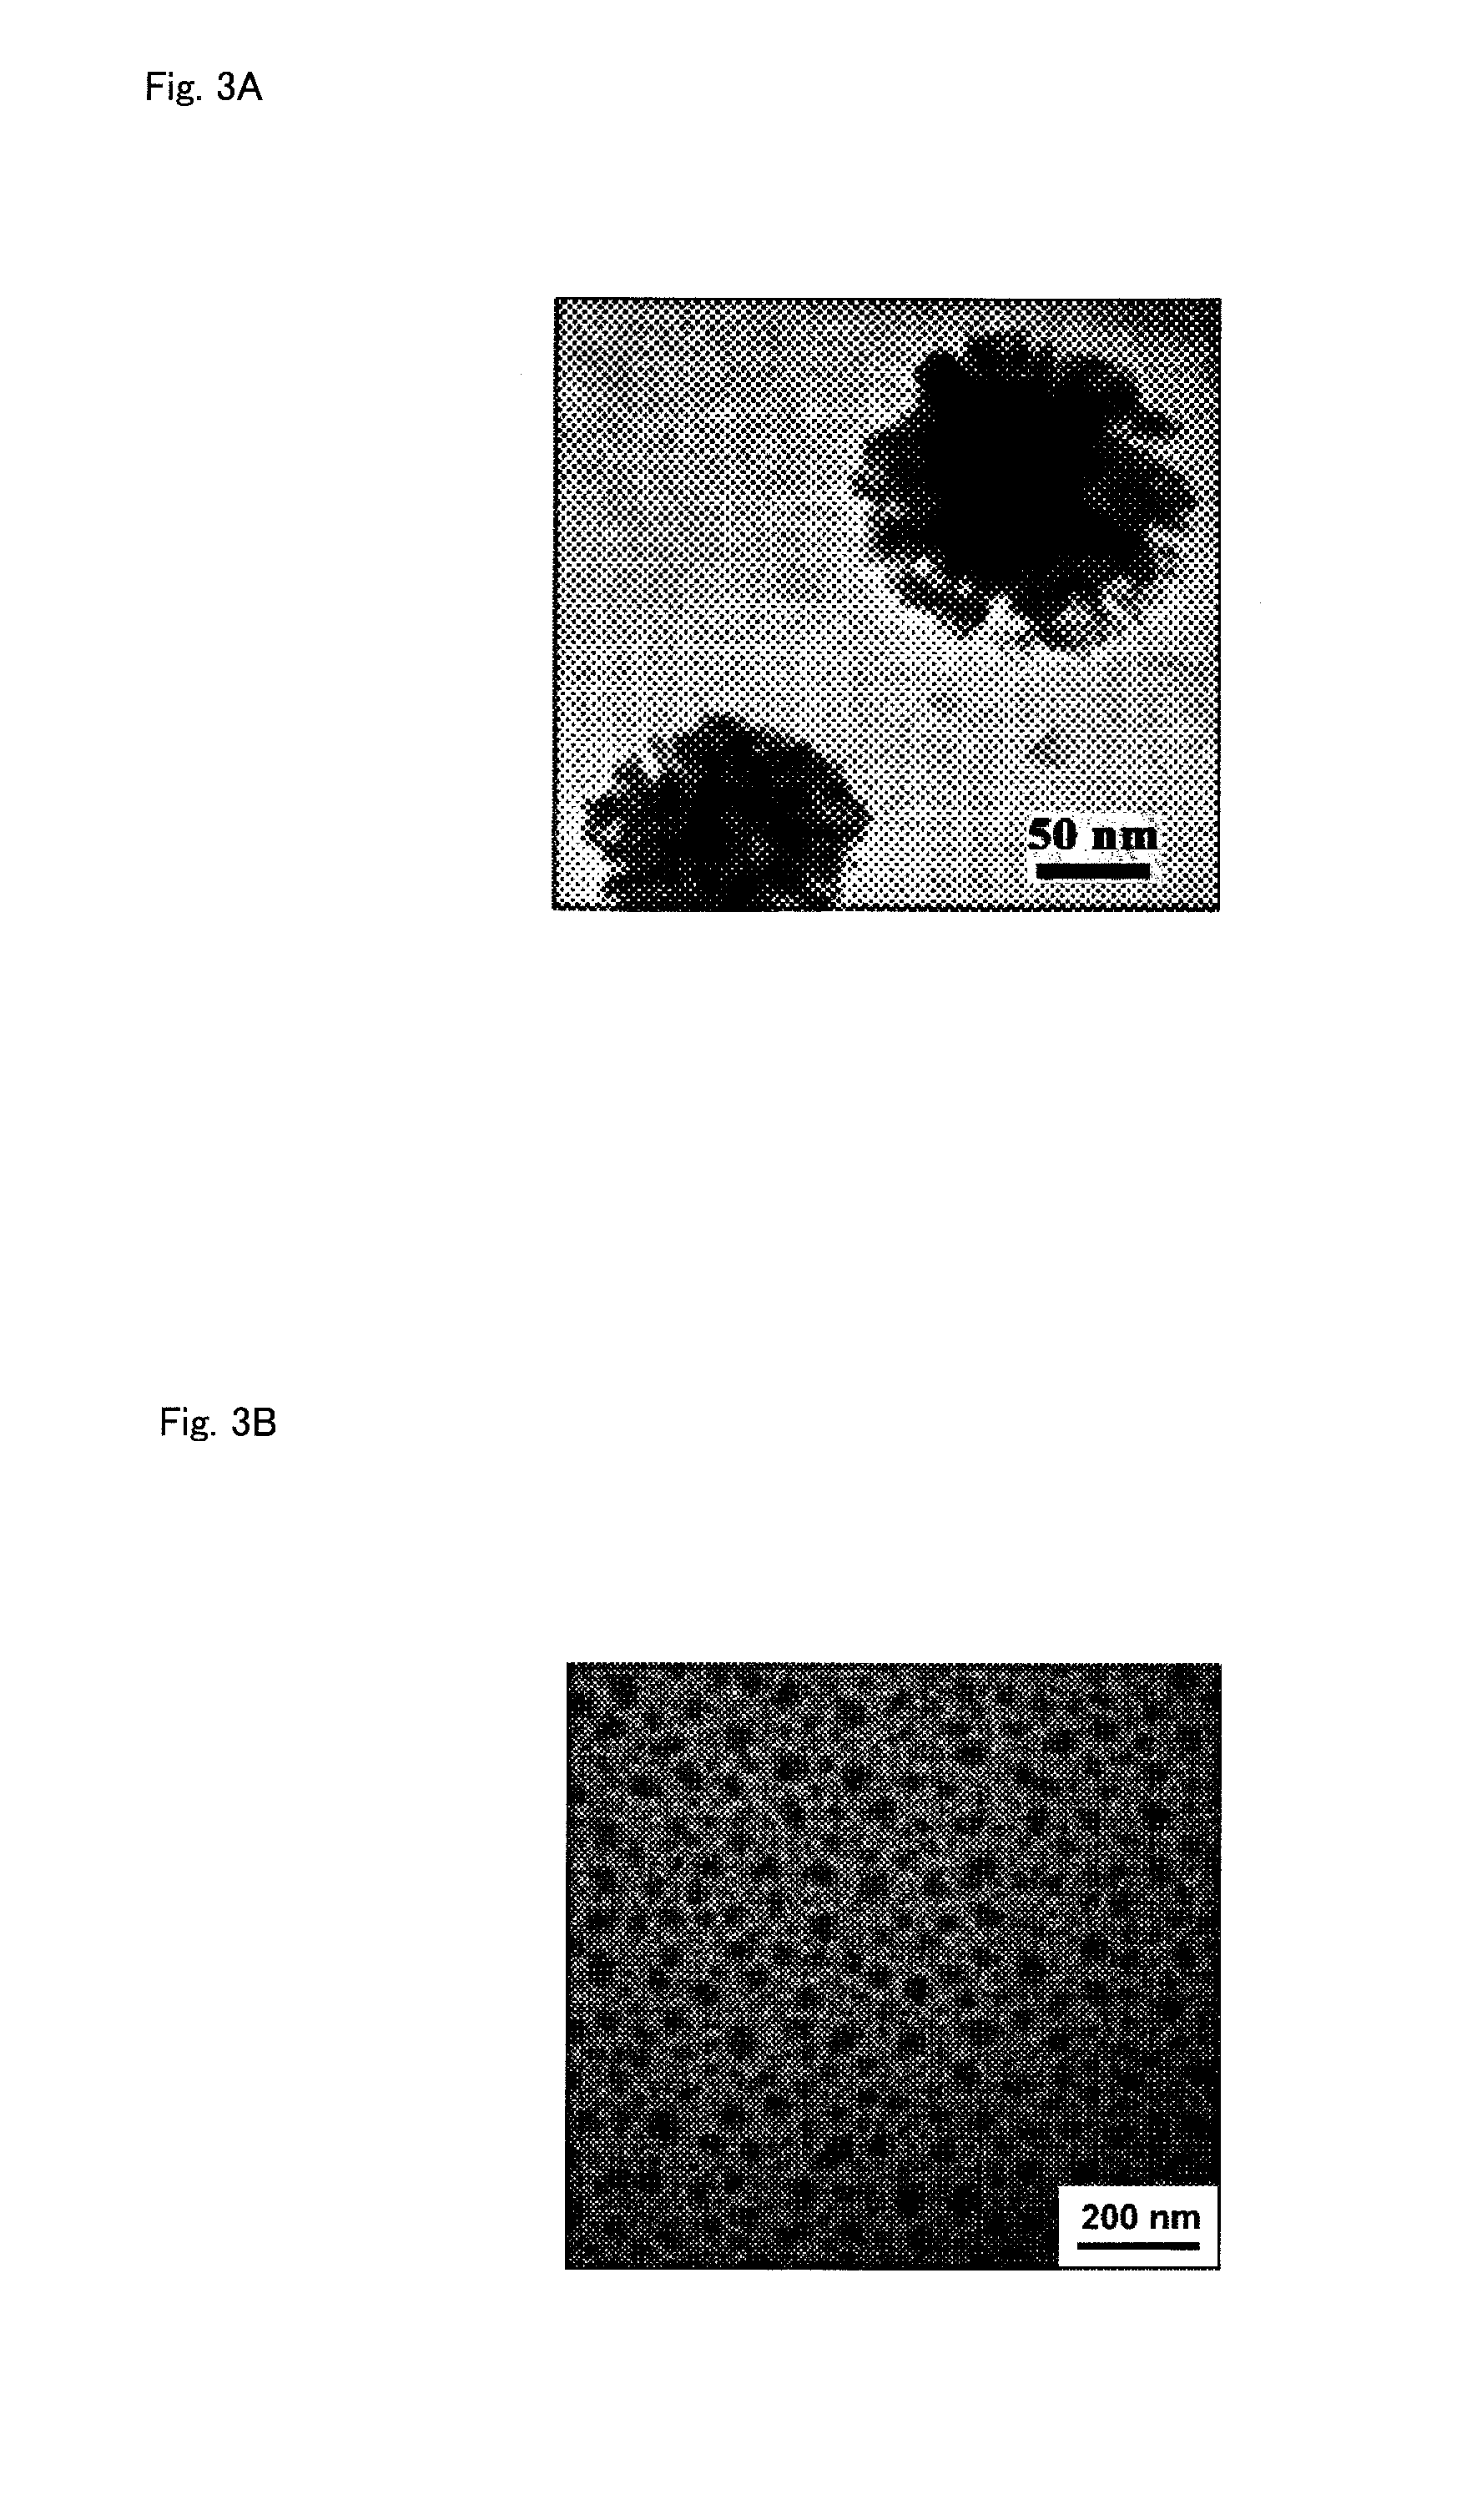 Polymerizable Monomer, Graft Copolymer, and Surface Modifier